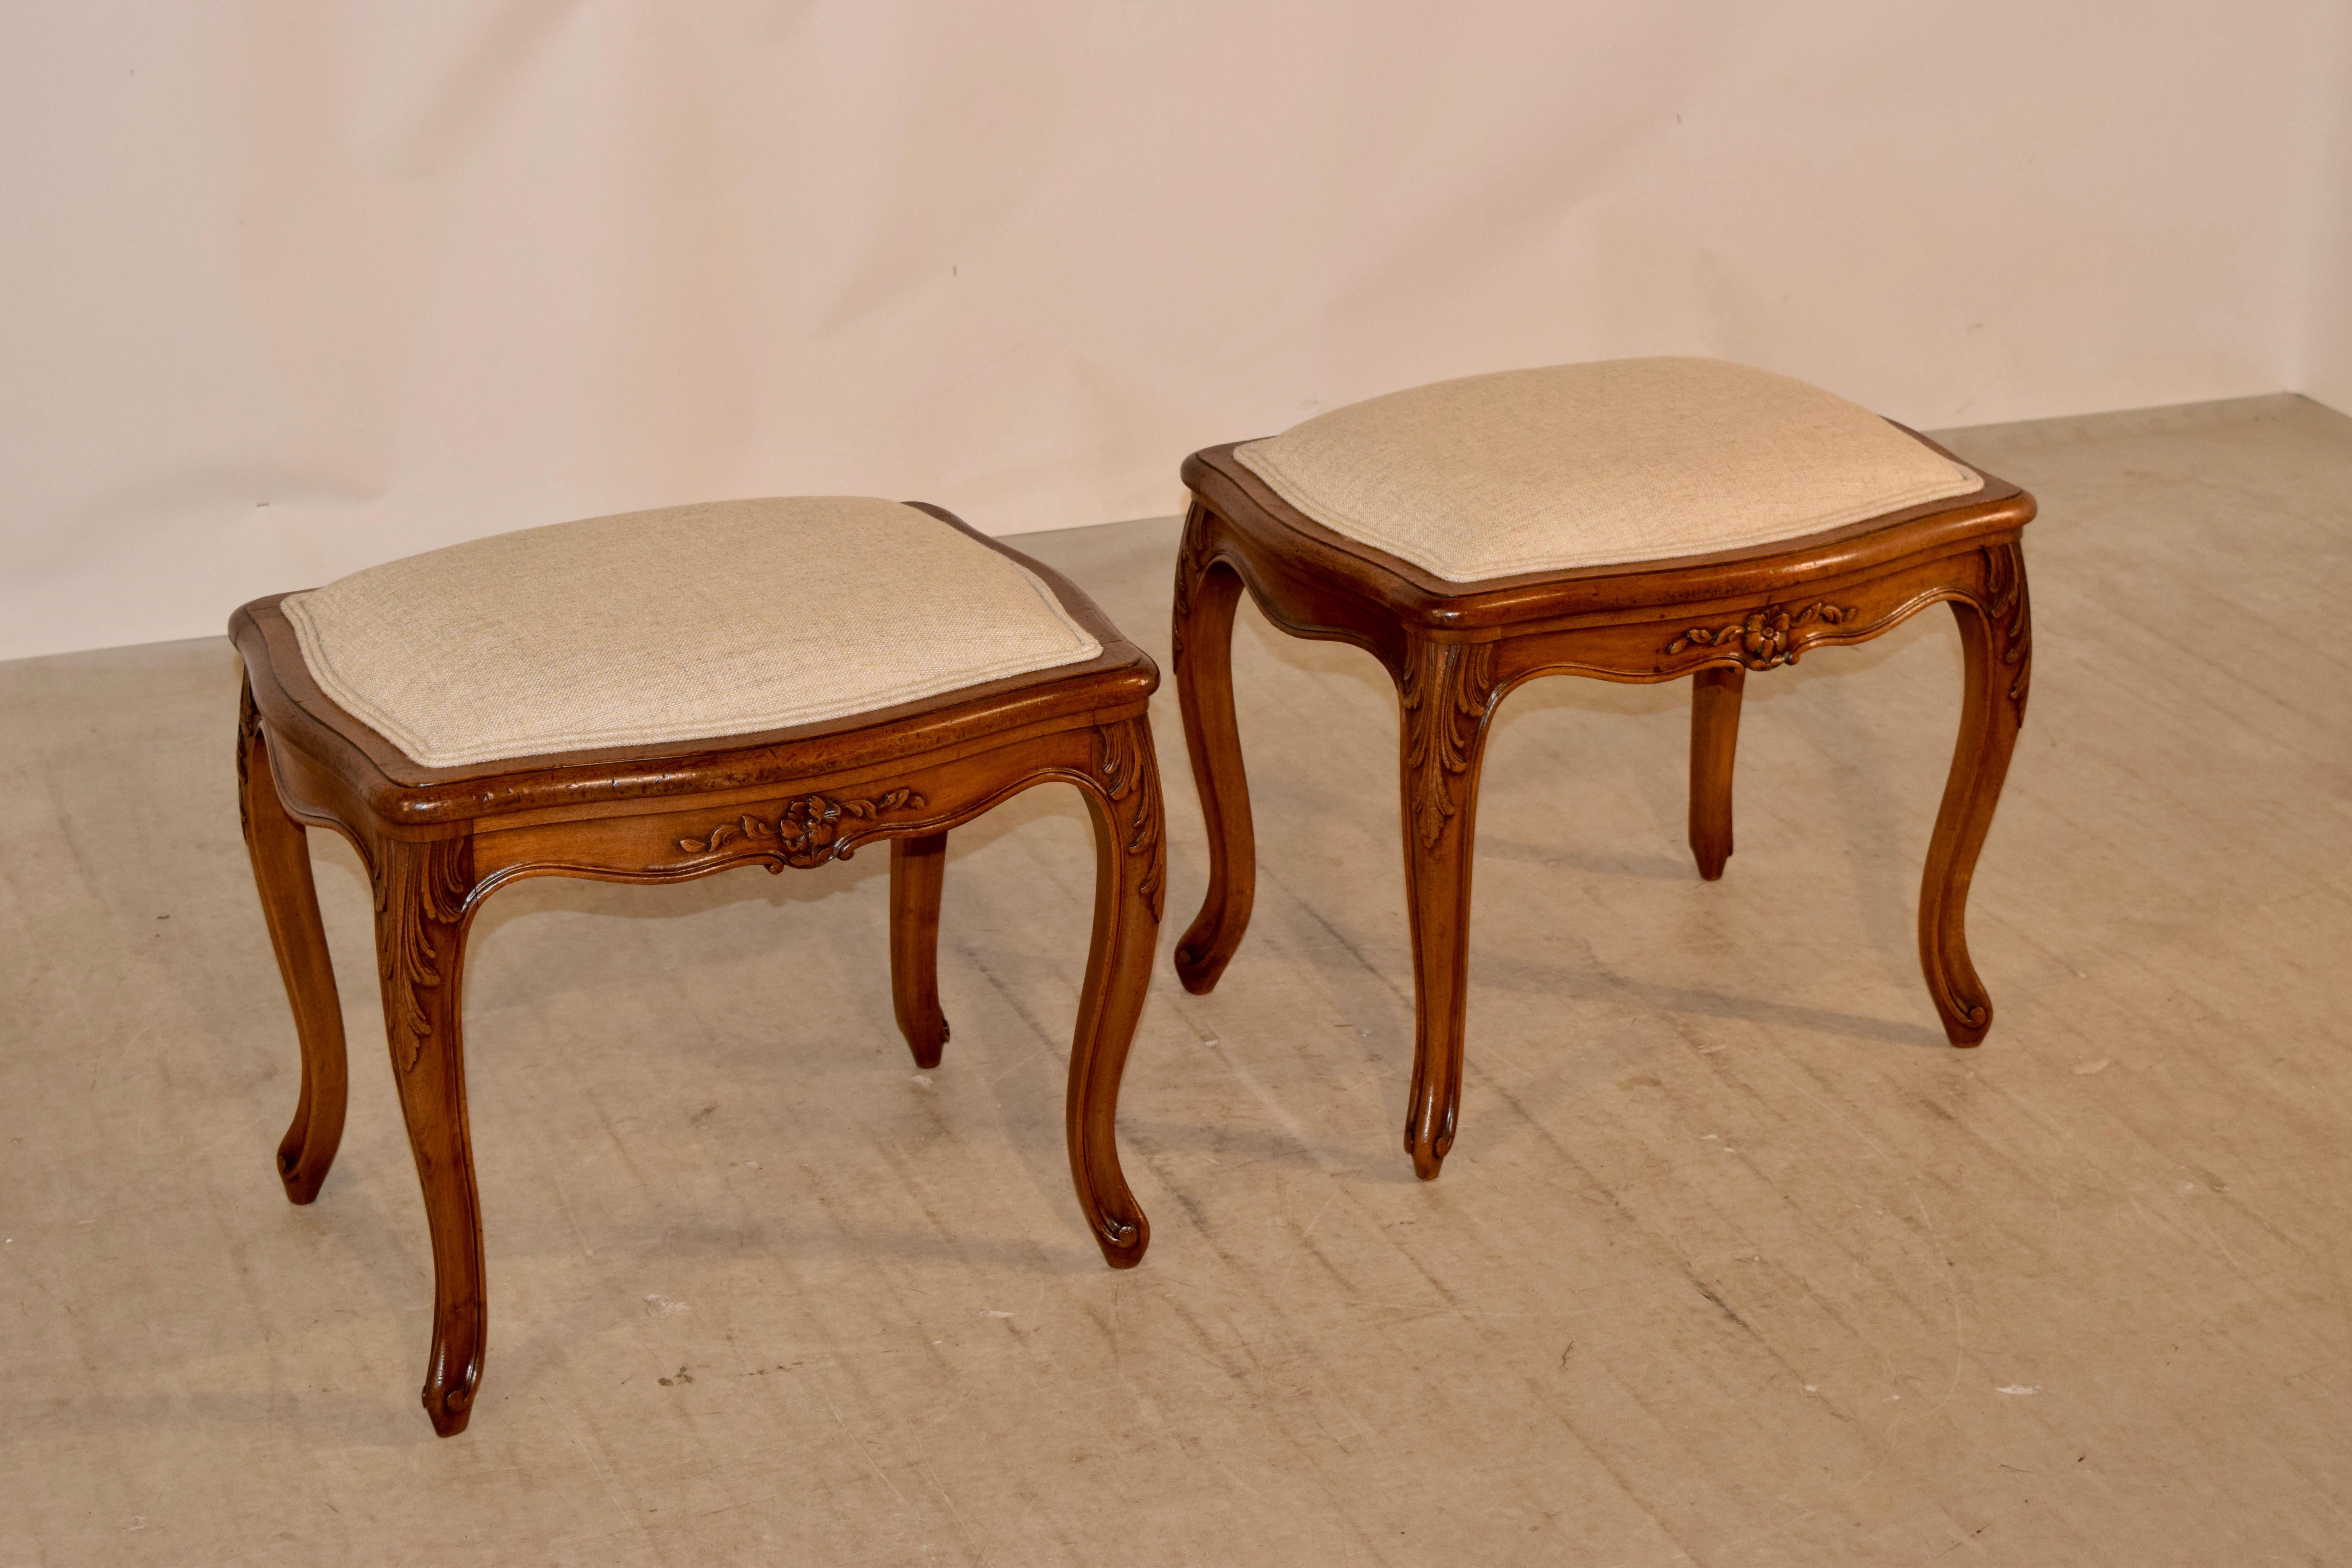 Pair of 19th century walnut stools from France with newly upholstered tops in linen, which are framed by scalloped and beveled edges around the border of the frame and following down to scalloped and hand carved decorated aprons and supported on